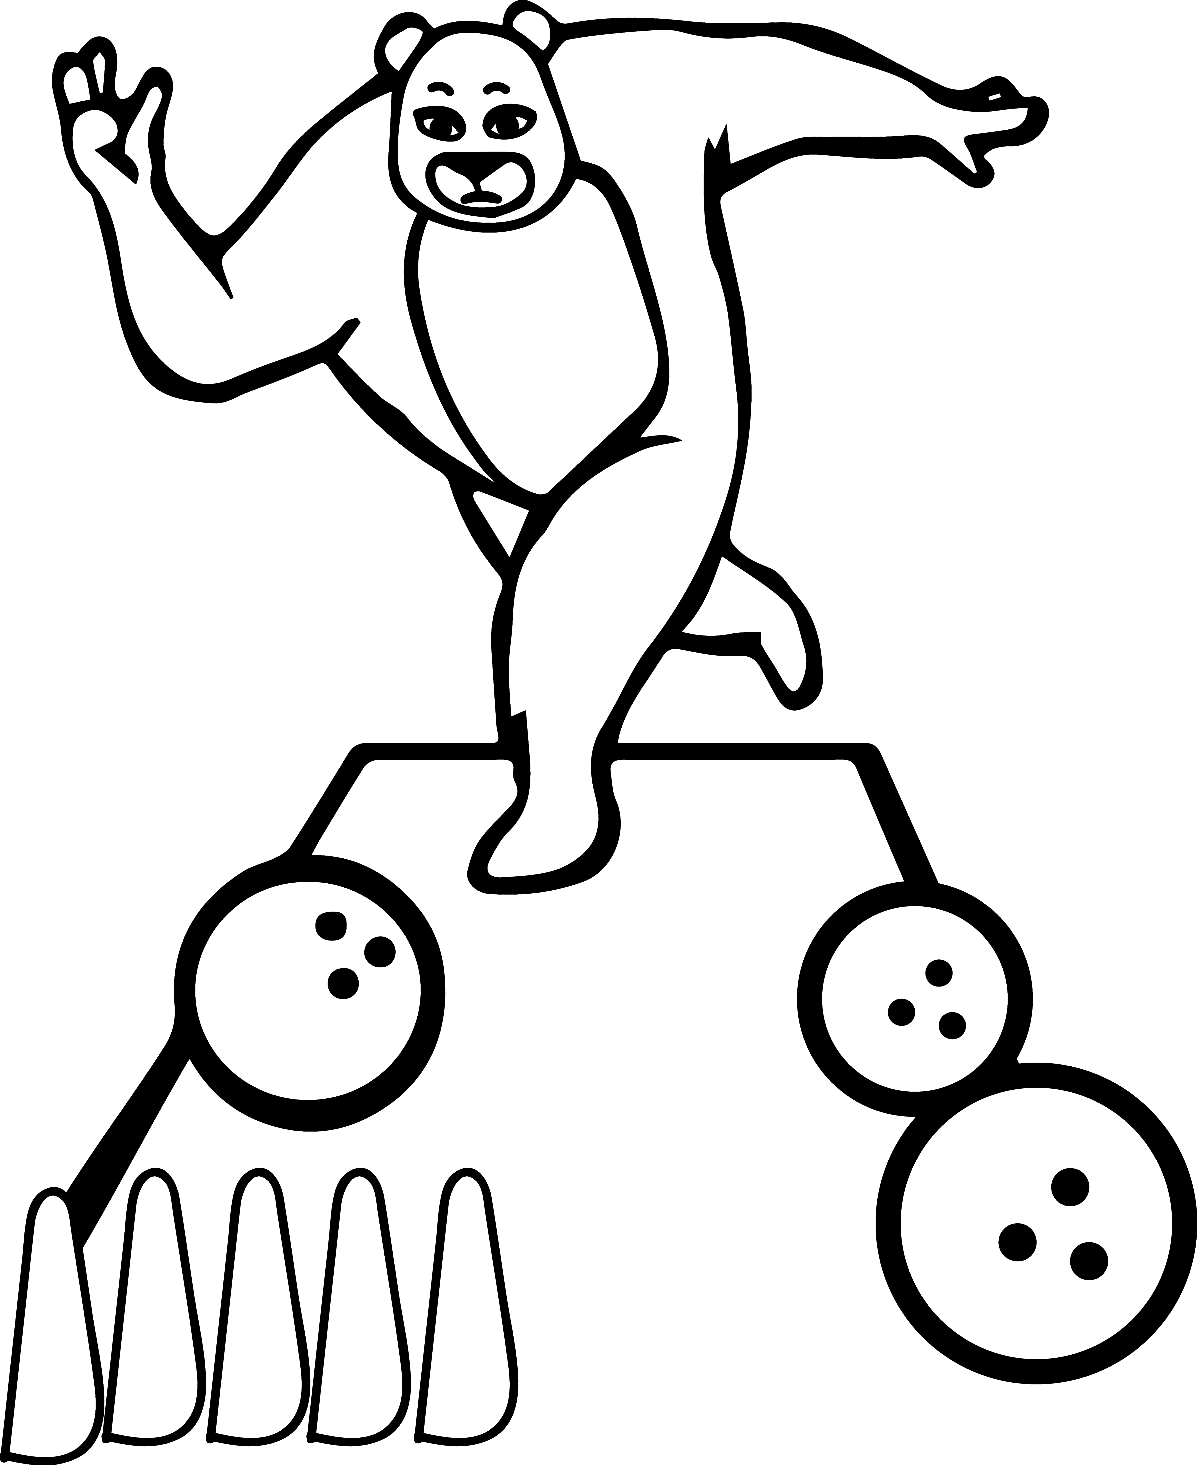 Bowling Bear Coloring Pages